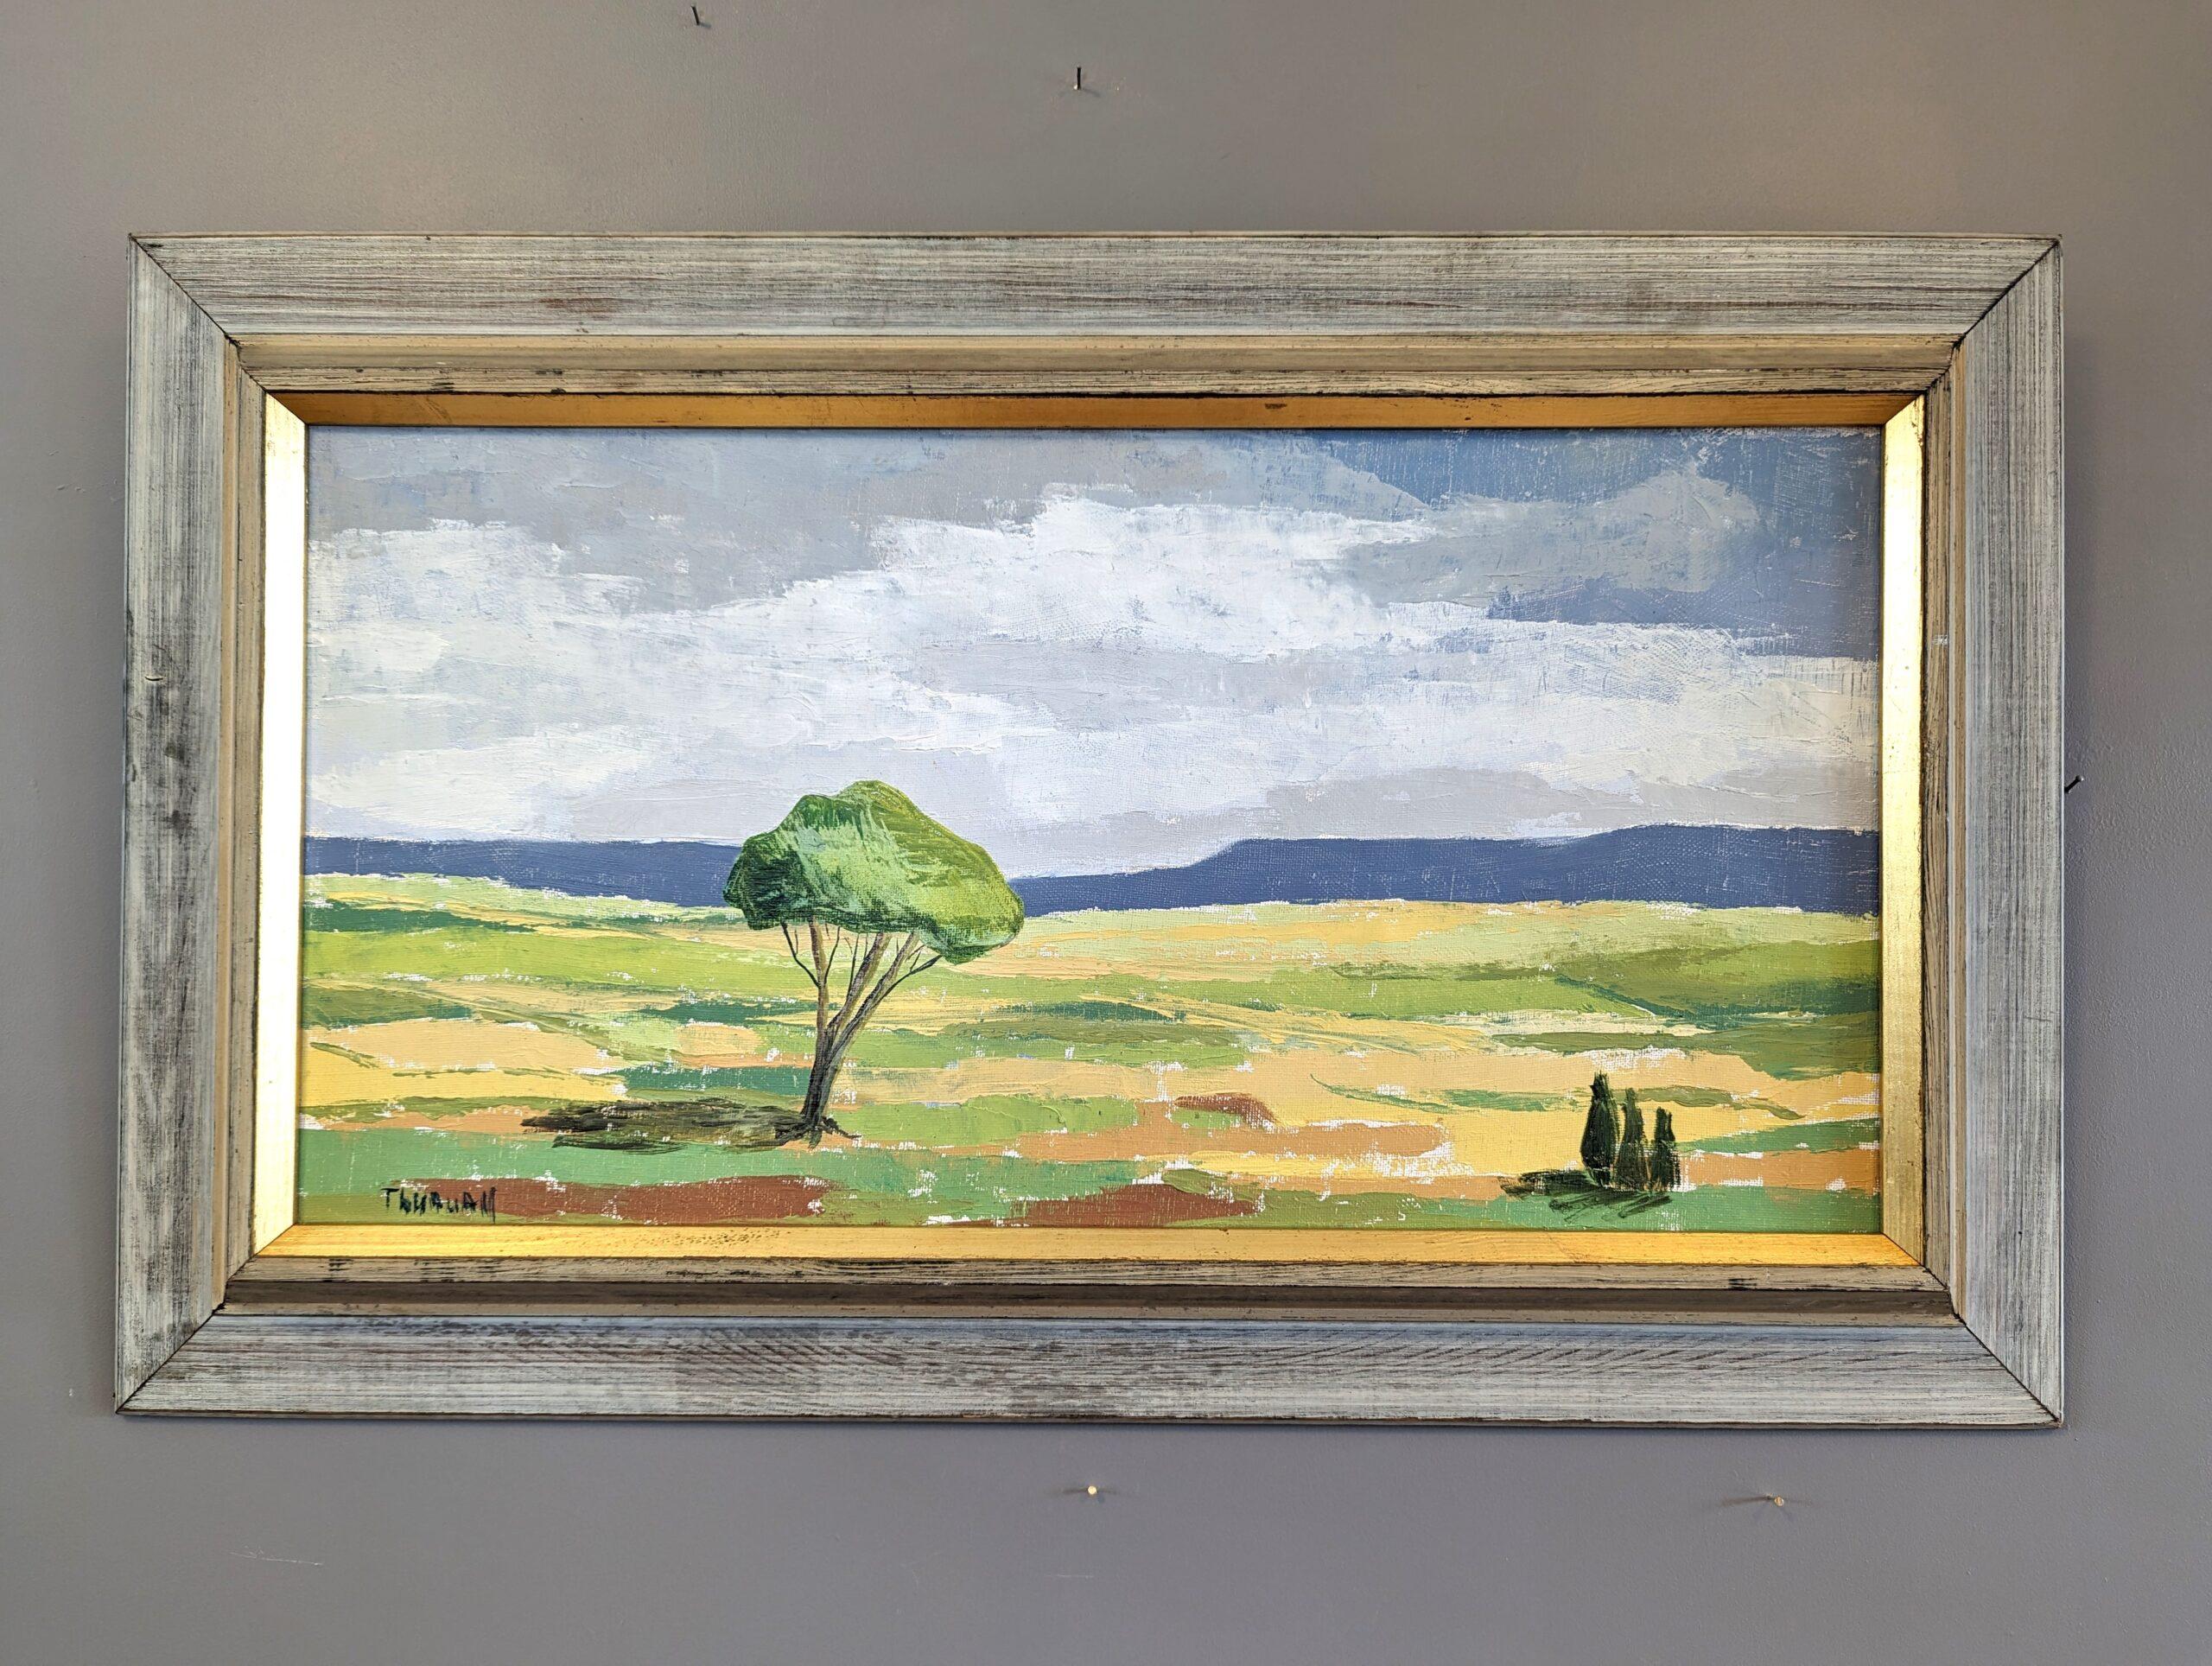 THE GREEN TREE
Size: 44 x 77 cm (including frame)
Oil on Canvas

A captivating mid-century modernist style landscape composition, executed in oil onto canvas.

At the forefront of this picturesque scene, a green tree stands proudly in the vast